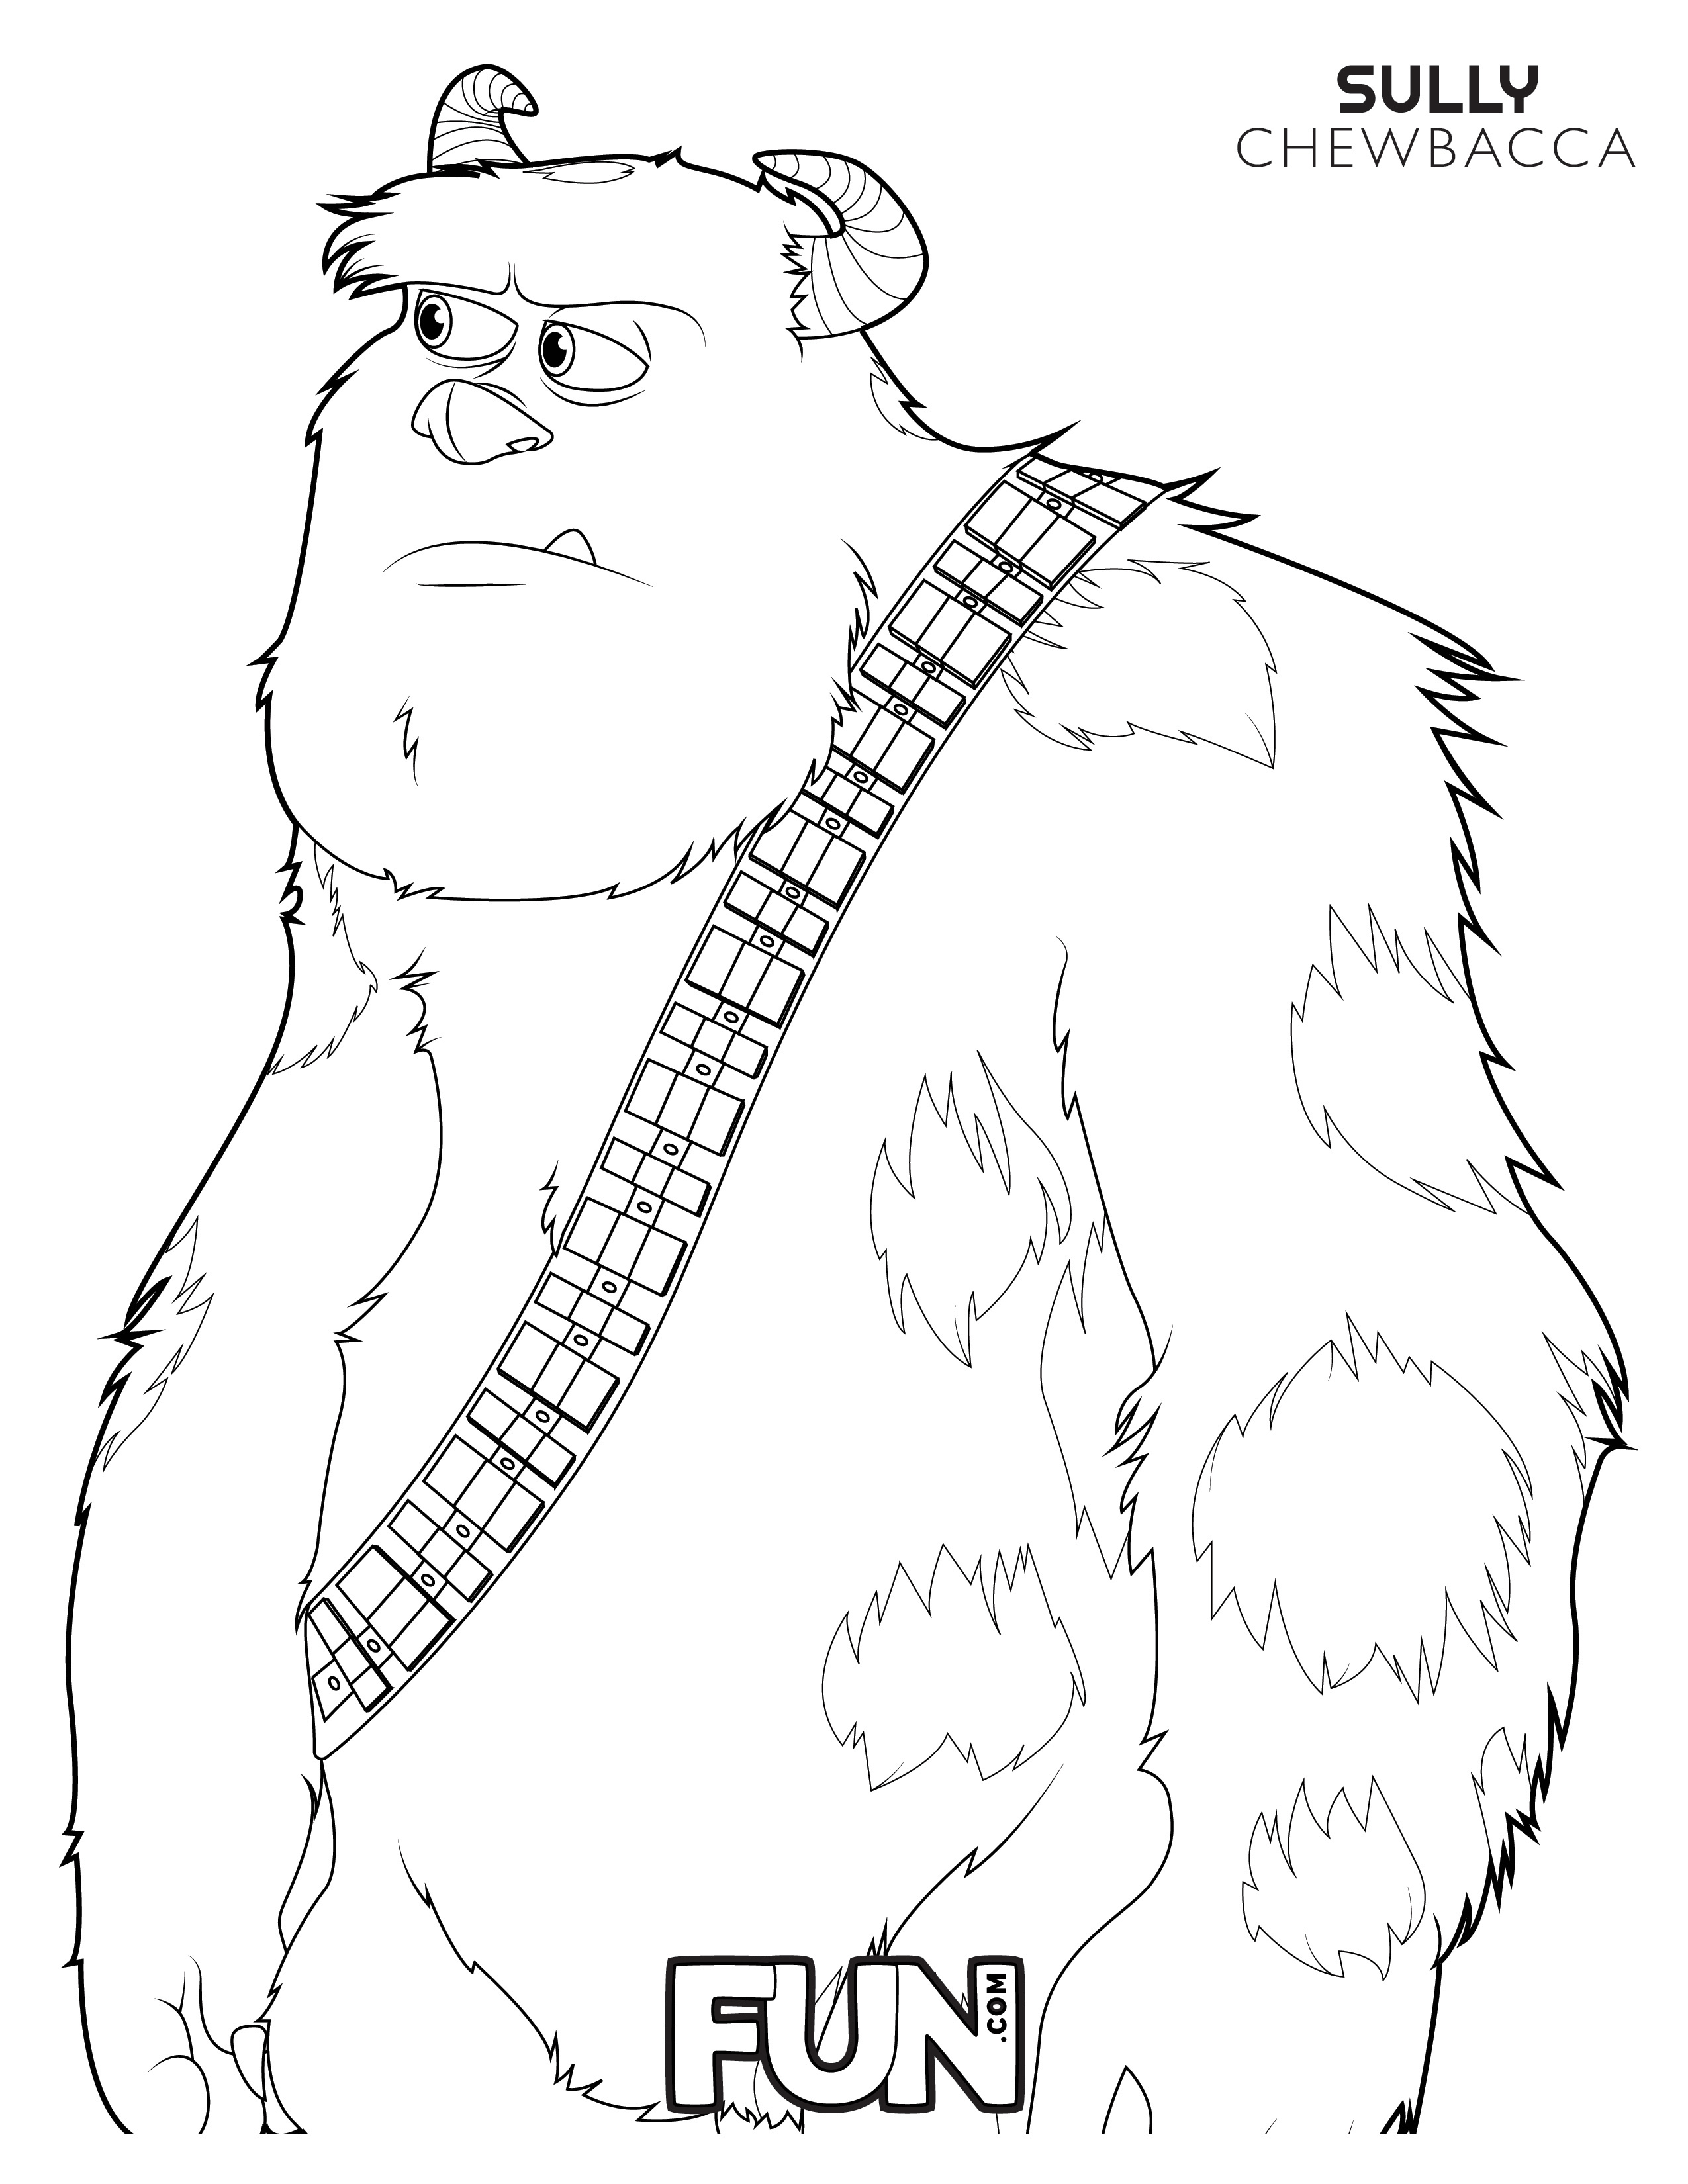 Sulley Chewbacca Coloring Page